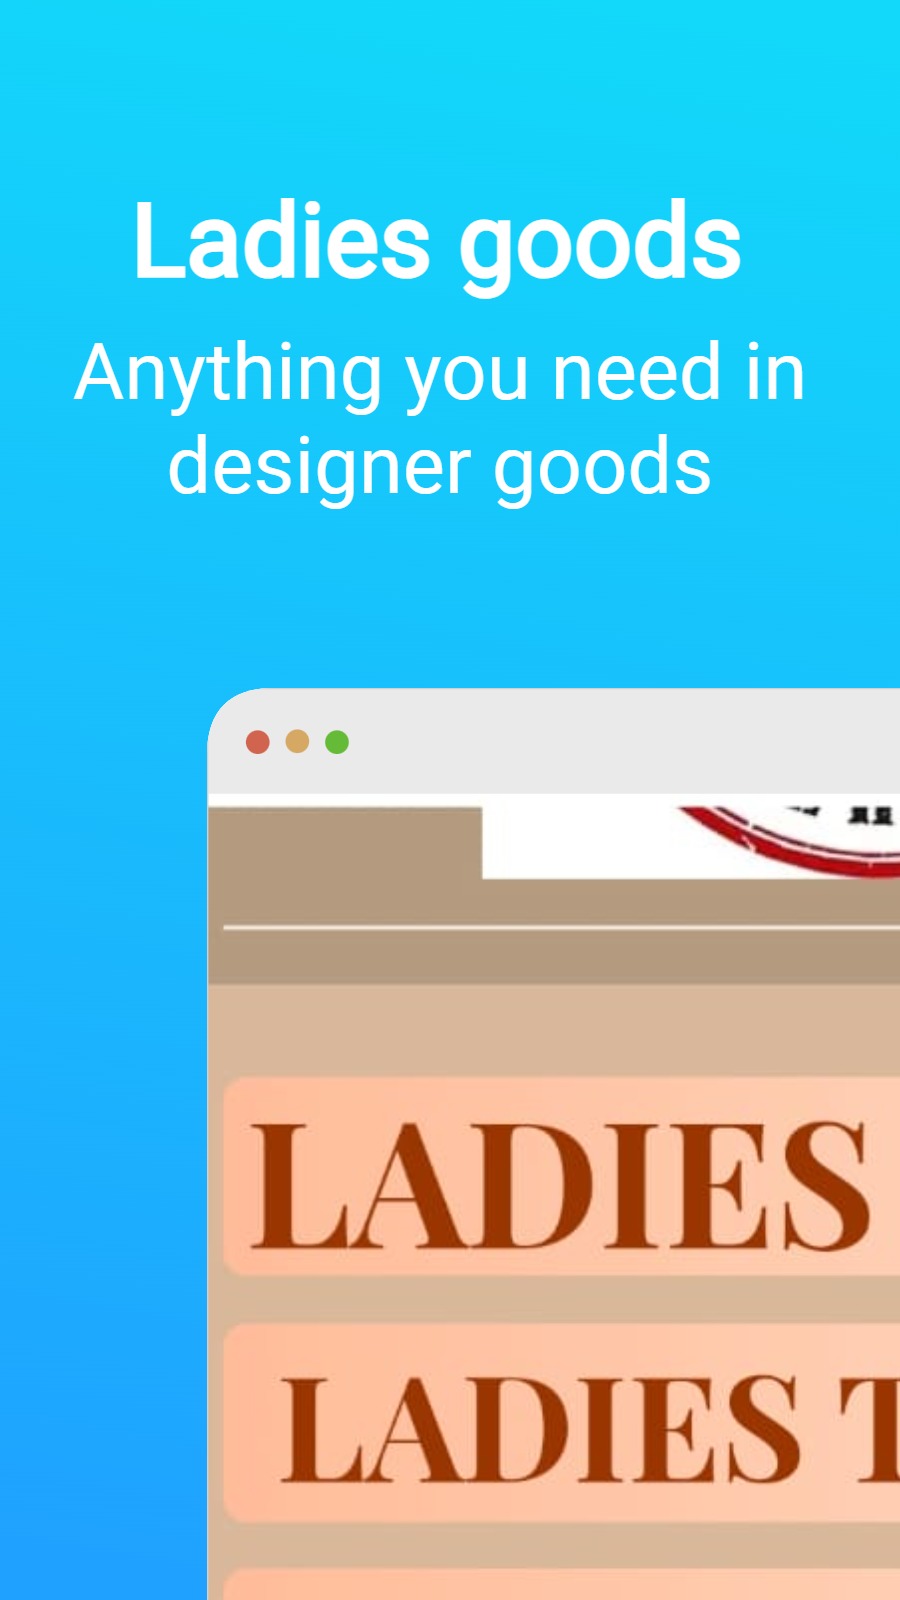 Ladies goods - Anything you need in designer goods